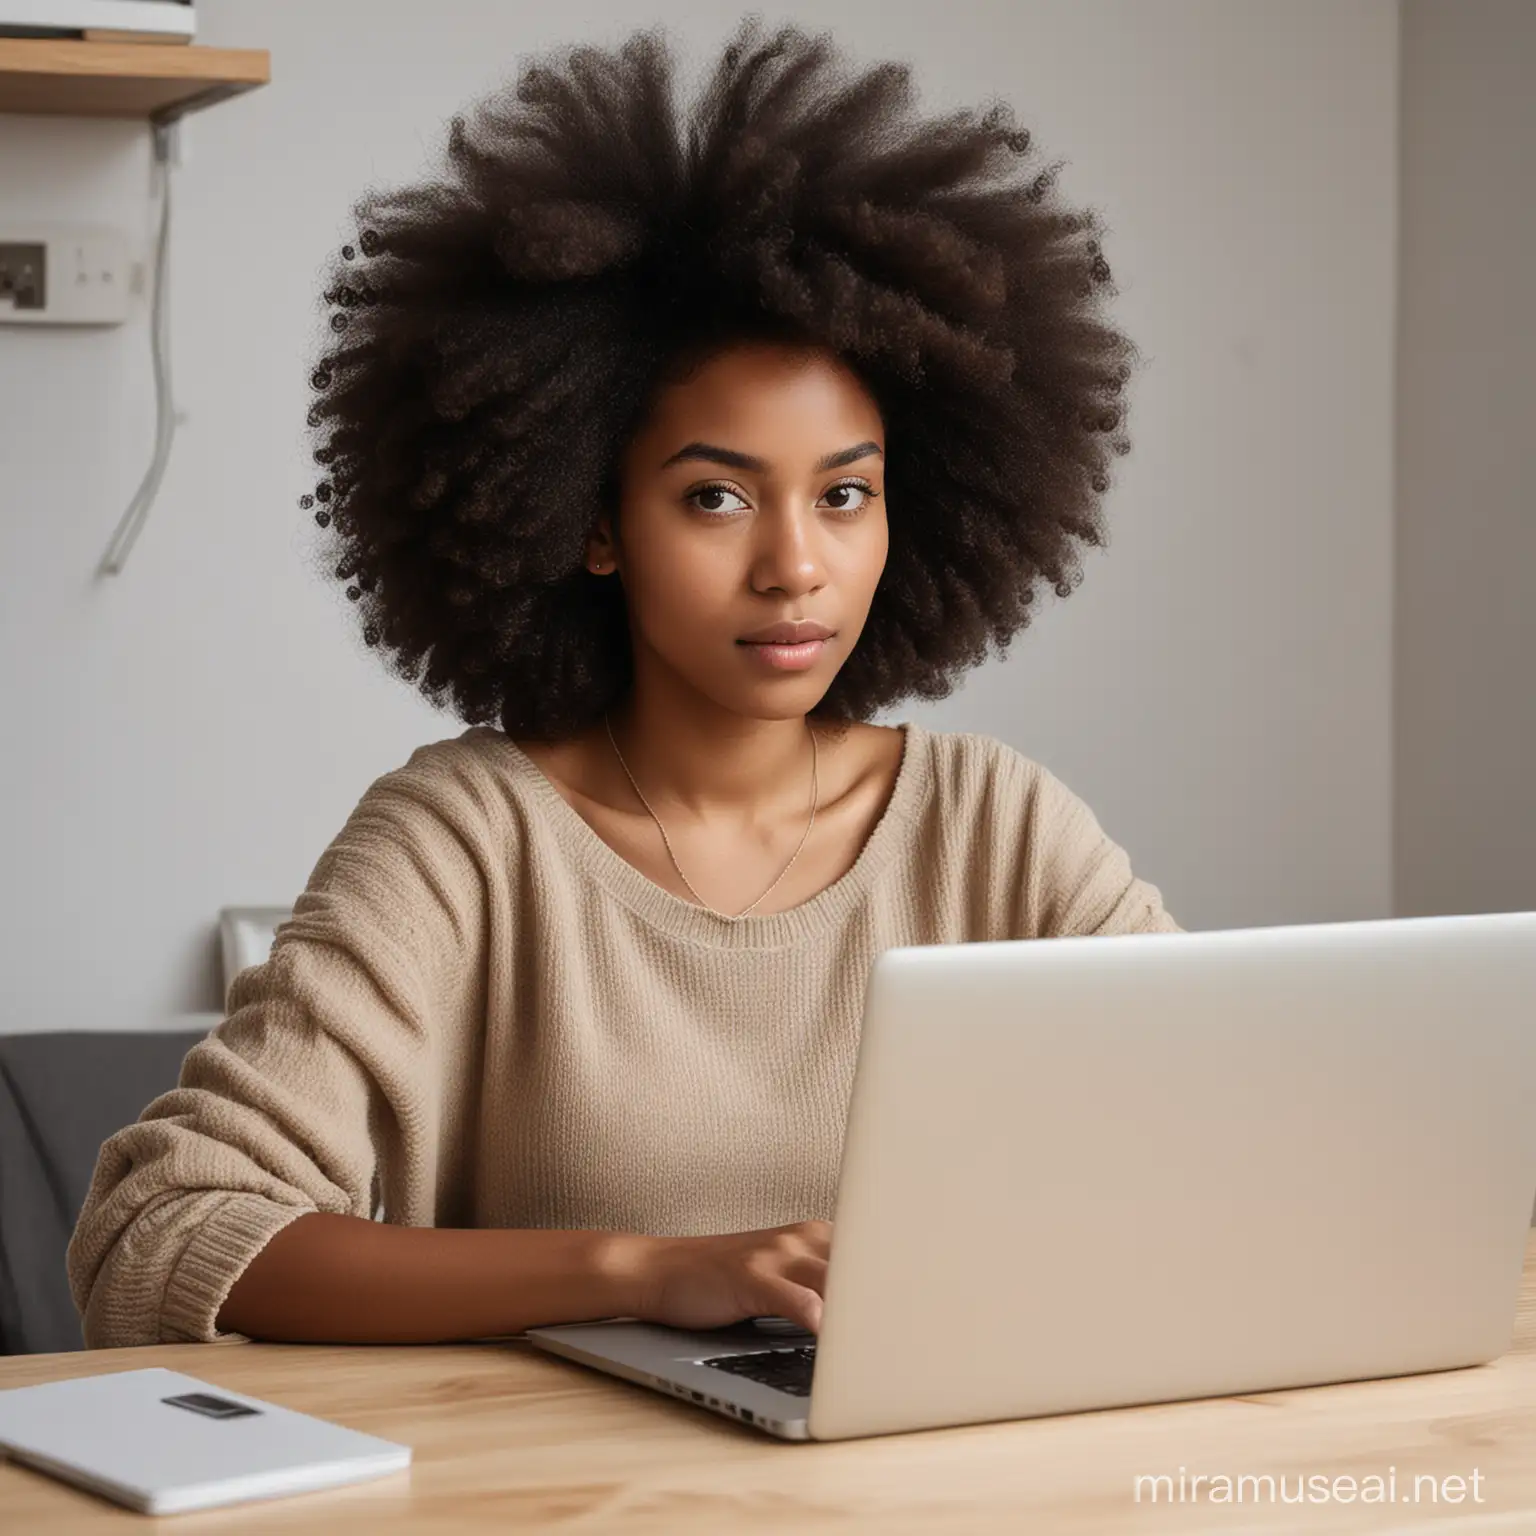 African American Girl with Afro Hairstyle Typing on Laptop